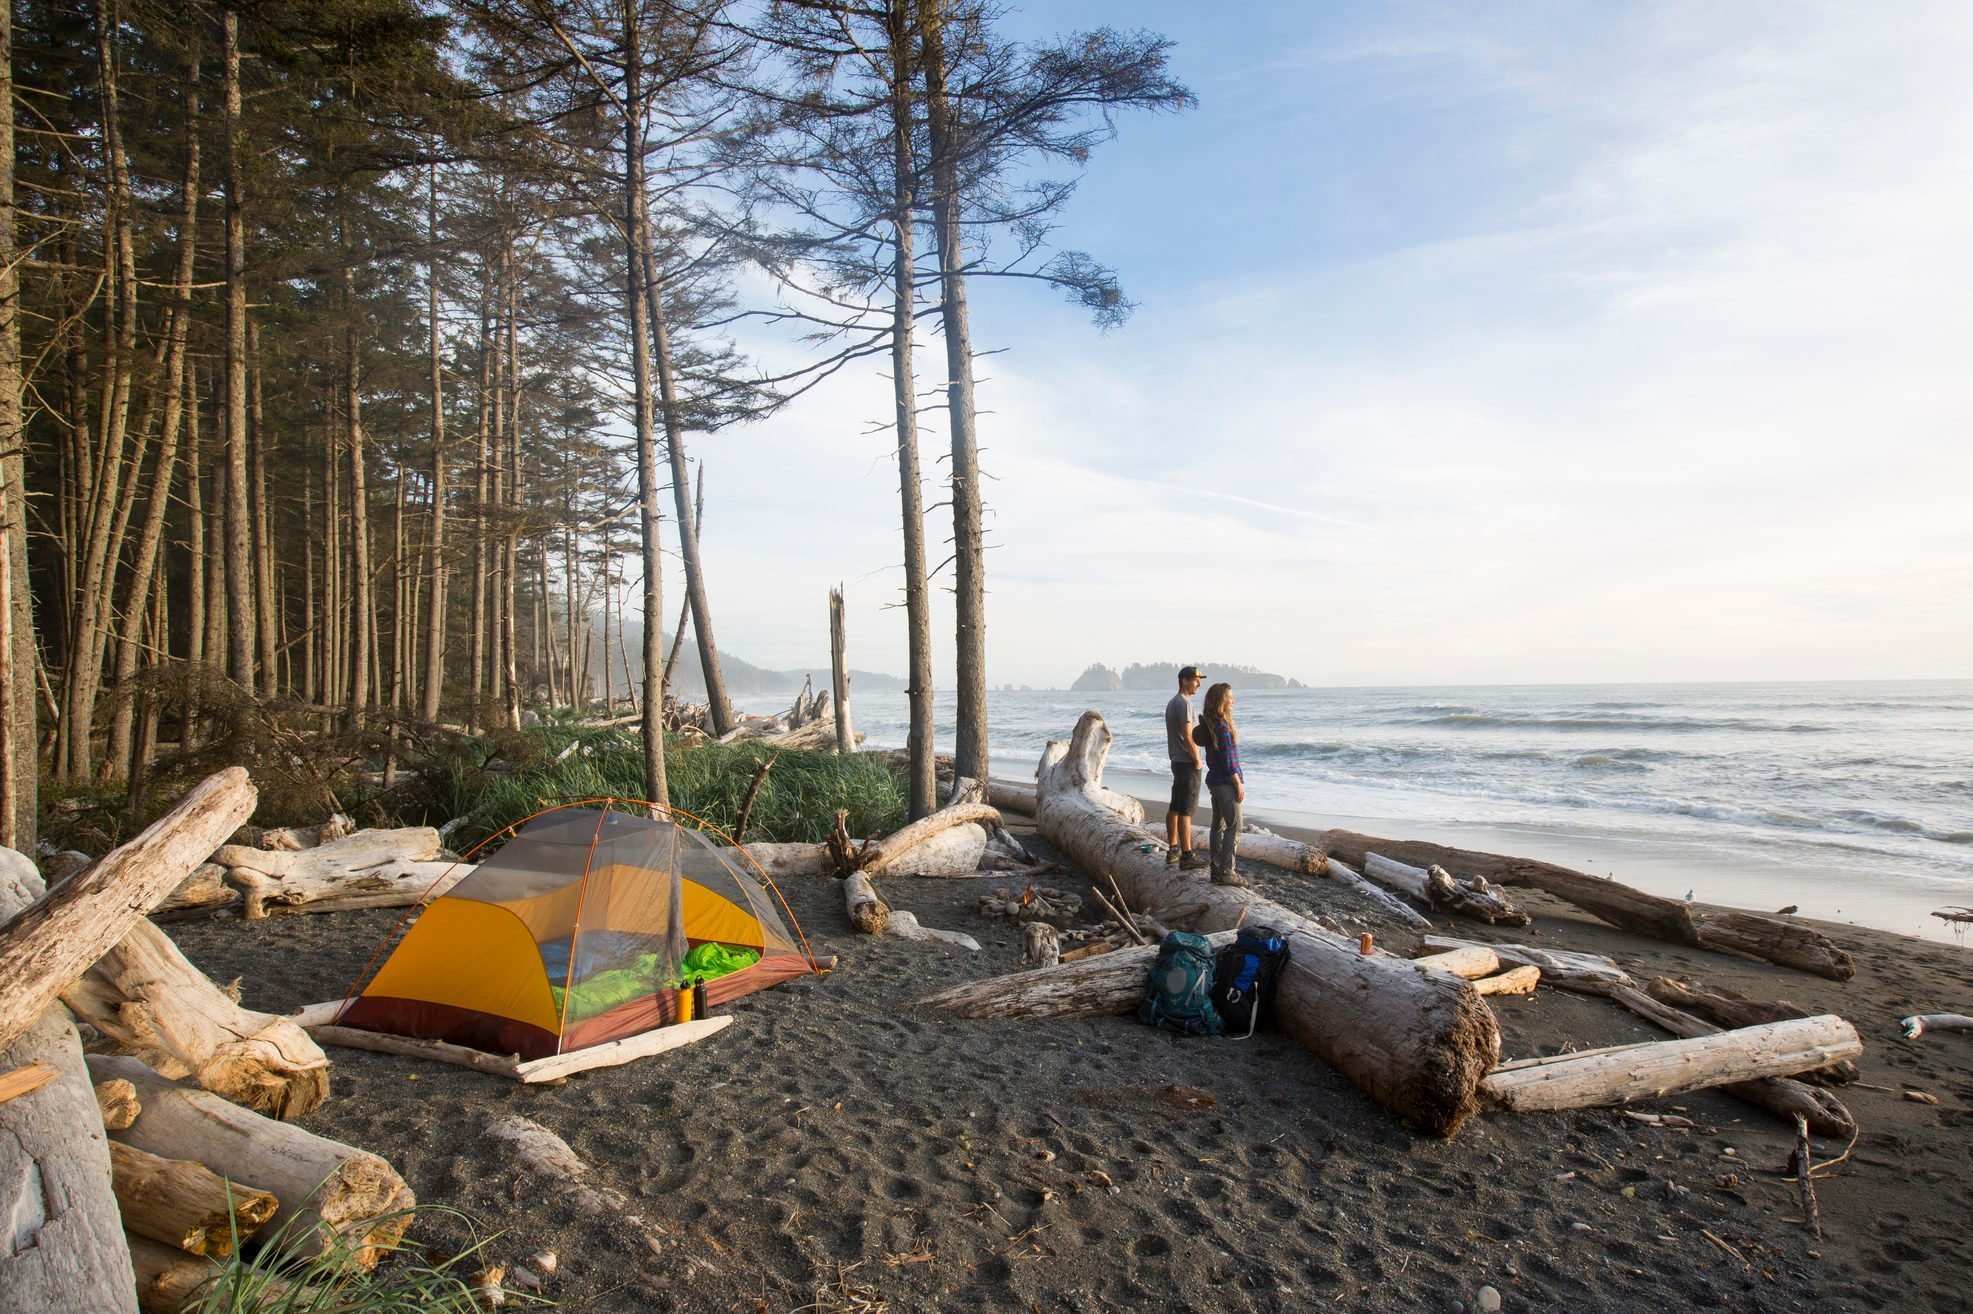 The Most Scenic Campsite in Every State